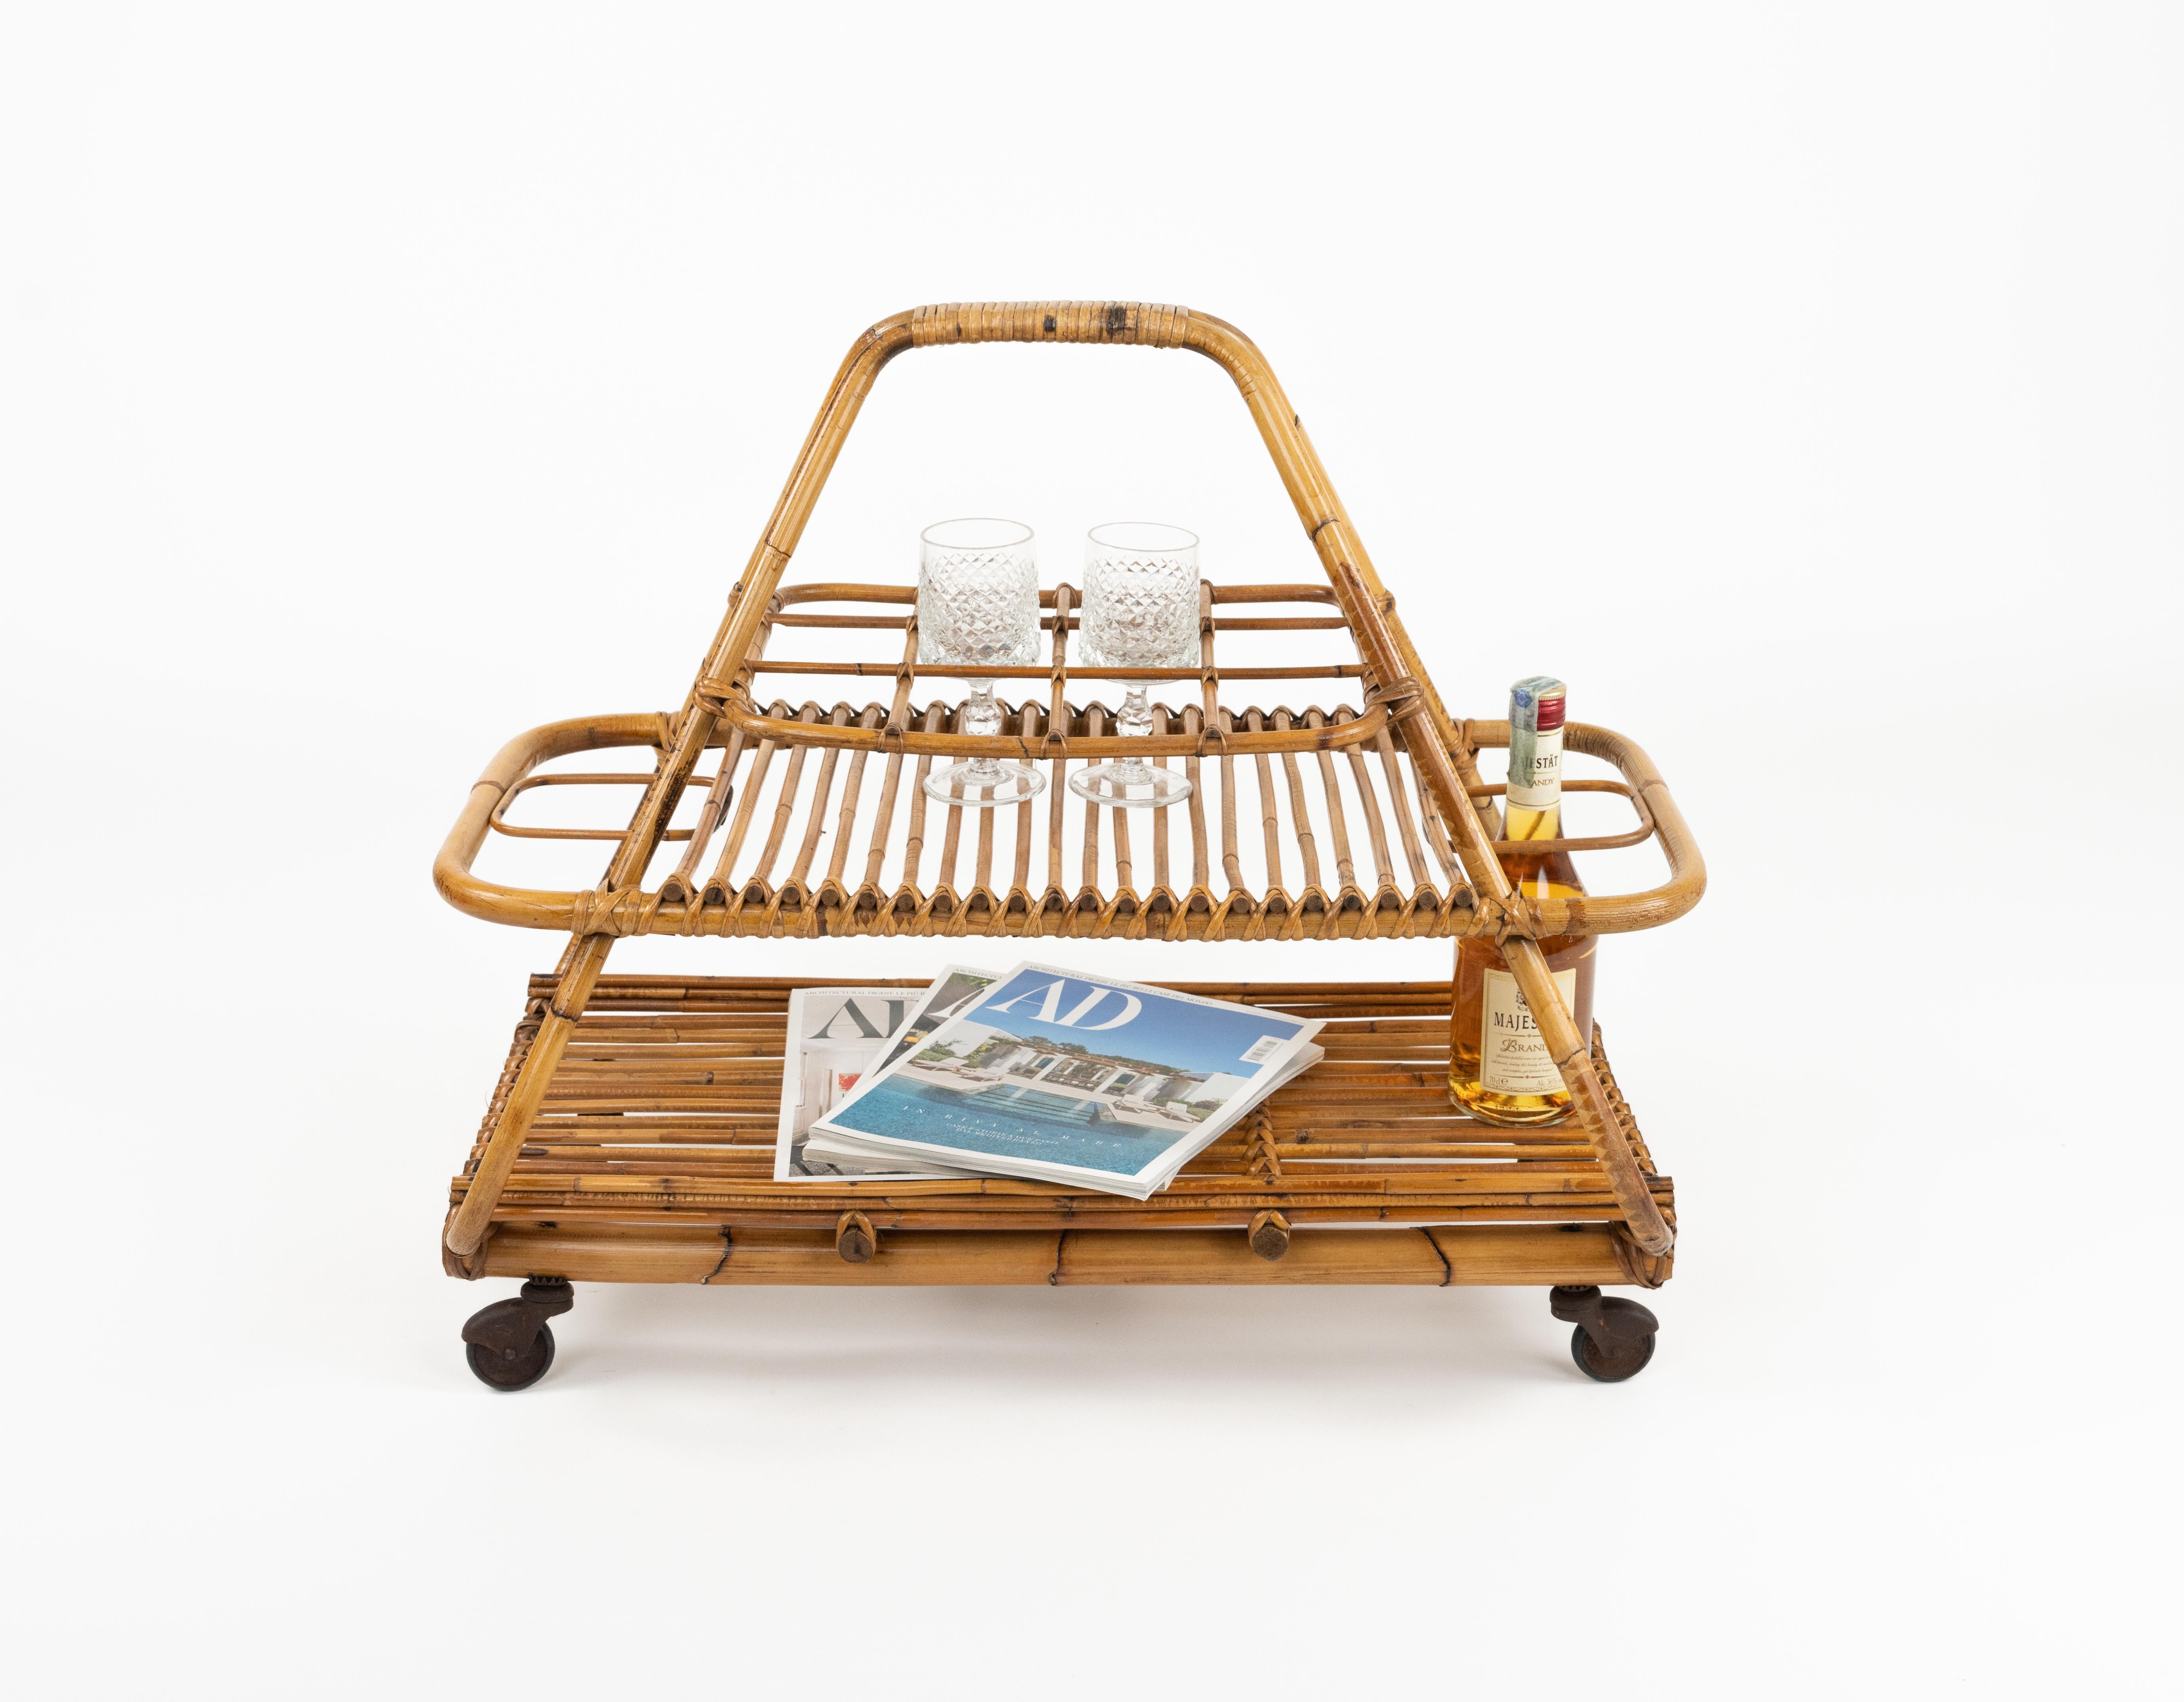 Metal Midcentury Serving Bar Cart with bottle holder in Rattan and Bamboo, Italy 1960s For Sale